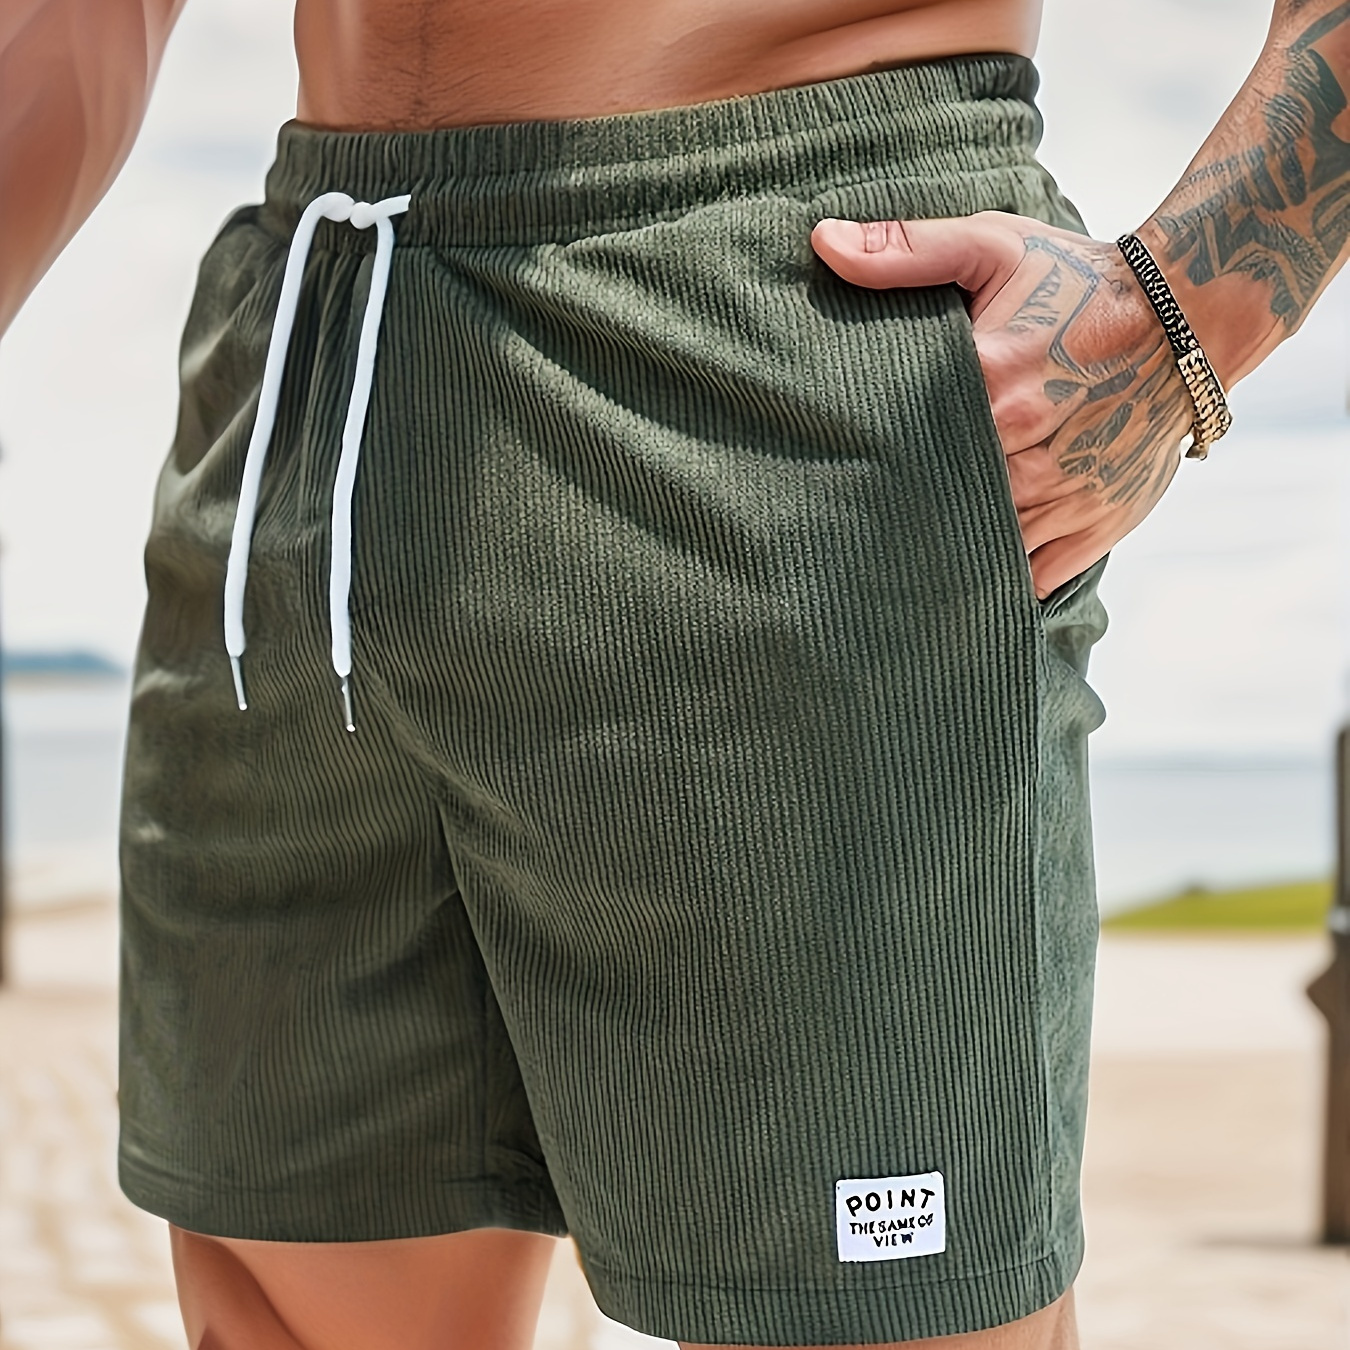 

Men's Casual And Chic Stripe Pattern Knit Shorts With Drawstring, Pockets And Contrast Color Label Patchwork Piece, Casual And Chic Shorts For Summer Outdoors Wear